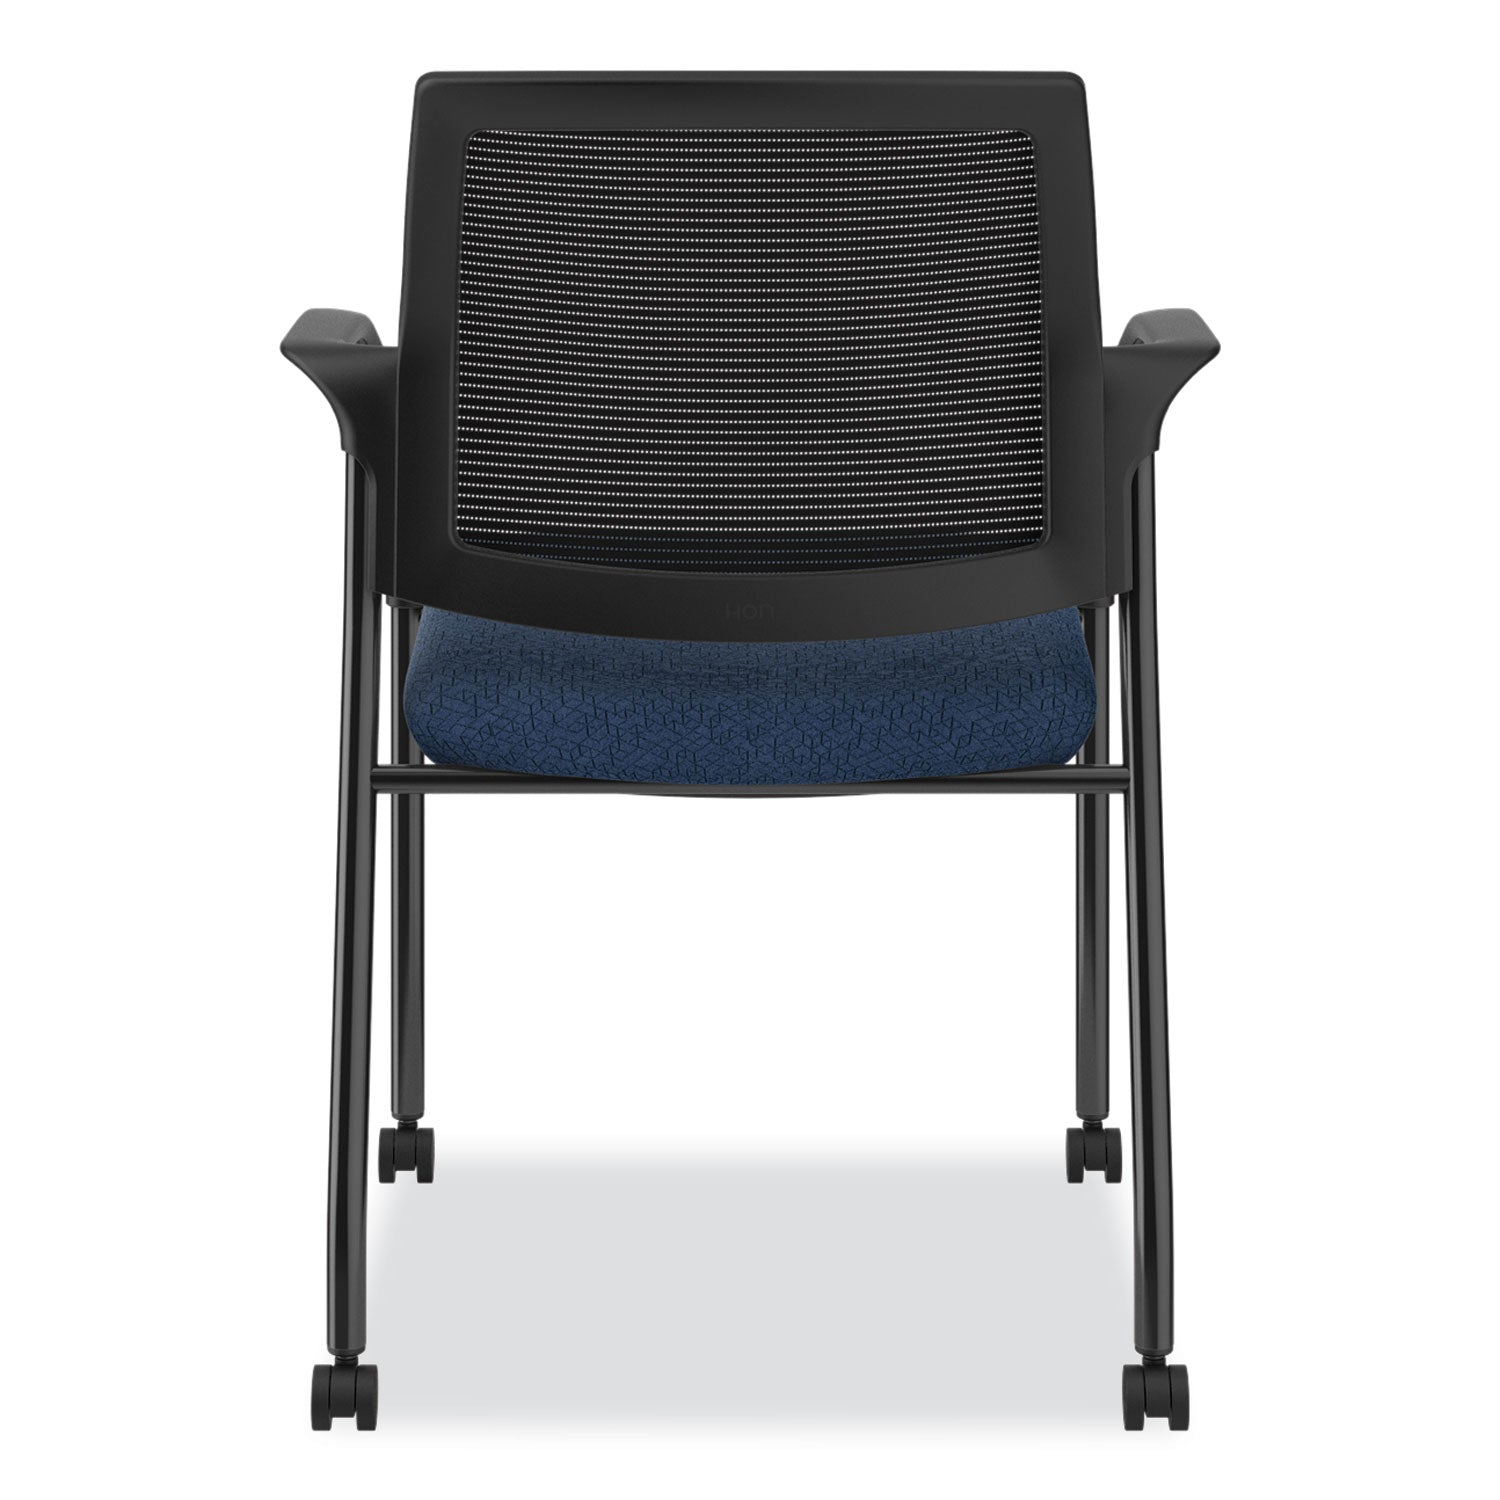 ignition-series-guest-chair-with-arms-25-x-2175-x-335-navy-seat-black-back-black-base-ships-in-7-10-business-days_honis107imapx13 - 3